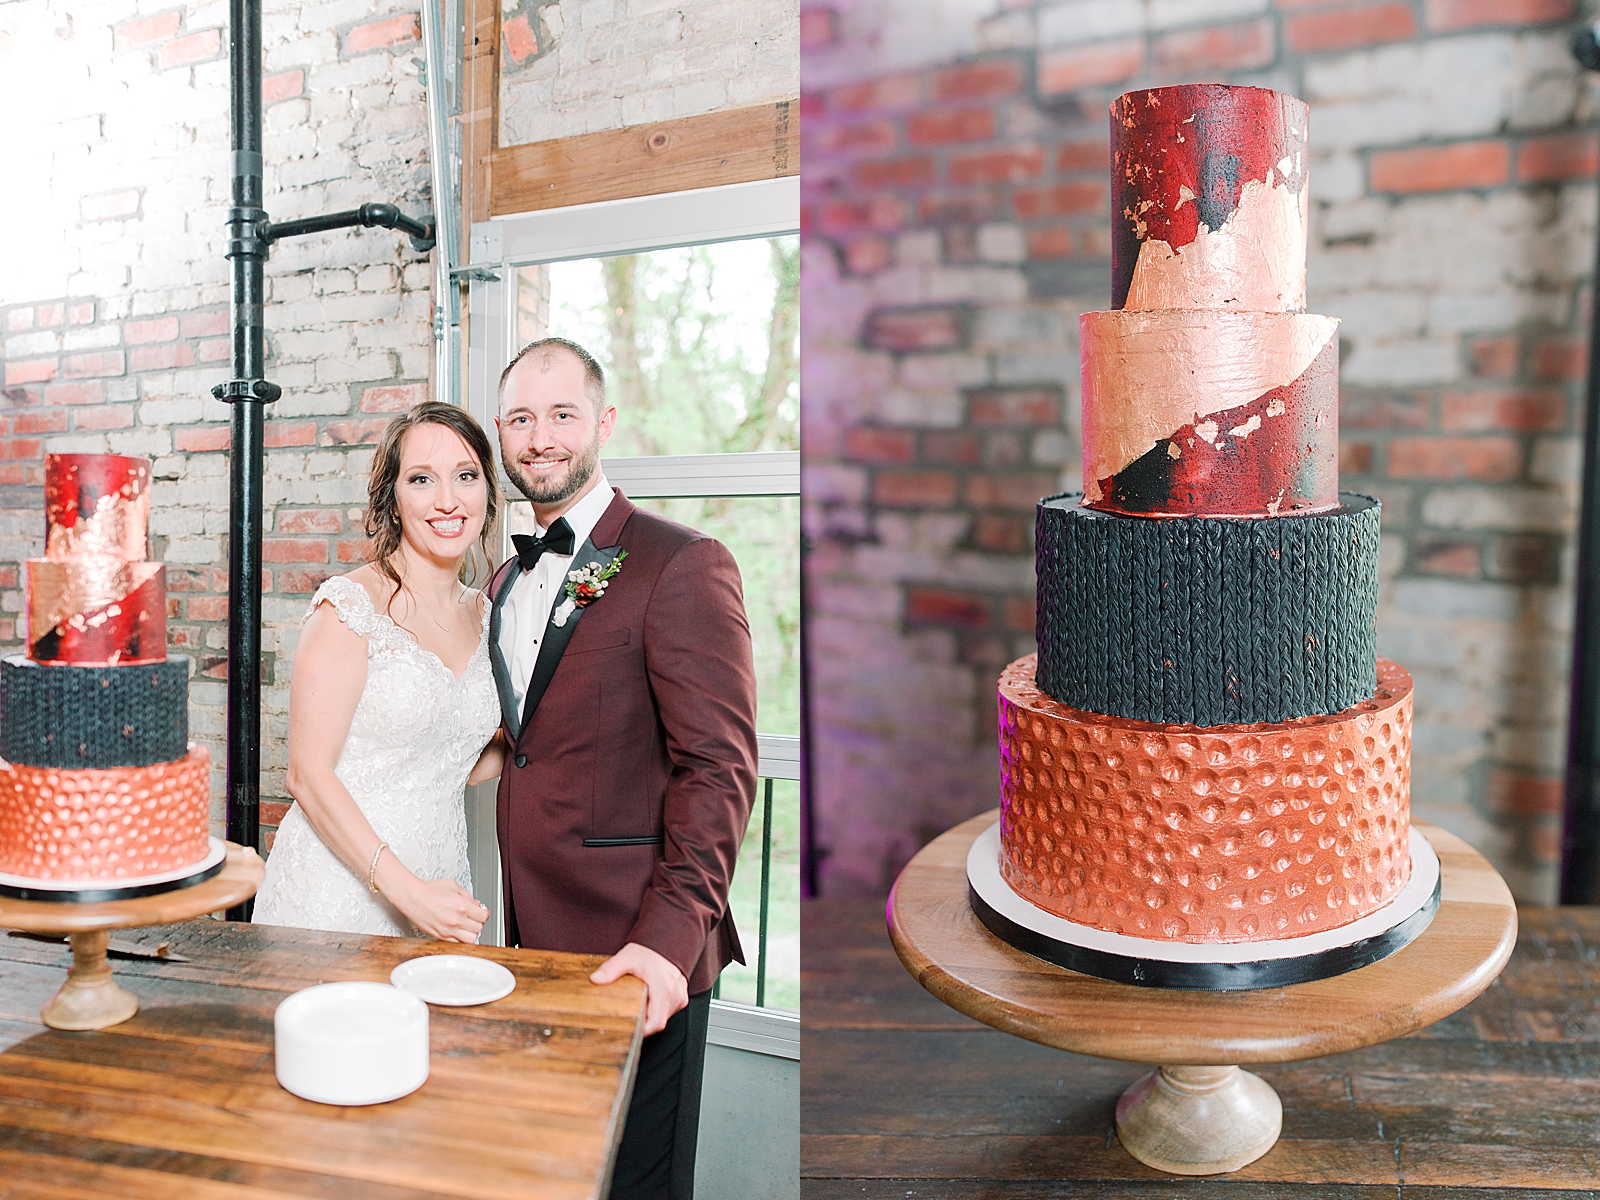 Hackney Warehouse Wedding Reception Bride and Groom smiling at camera next to cake and cake Photos